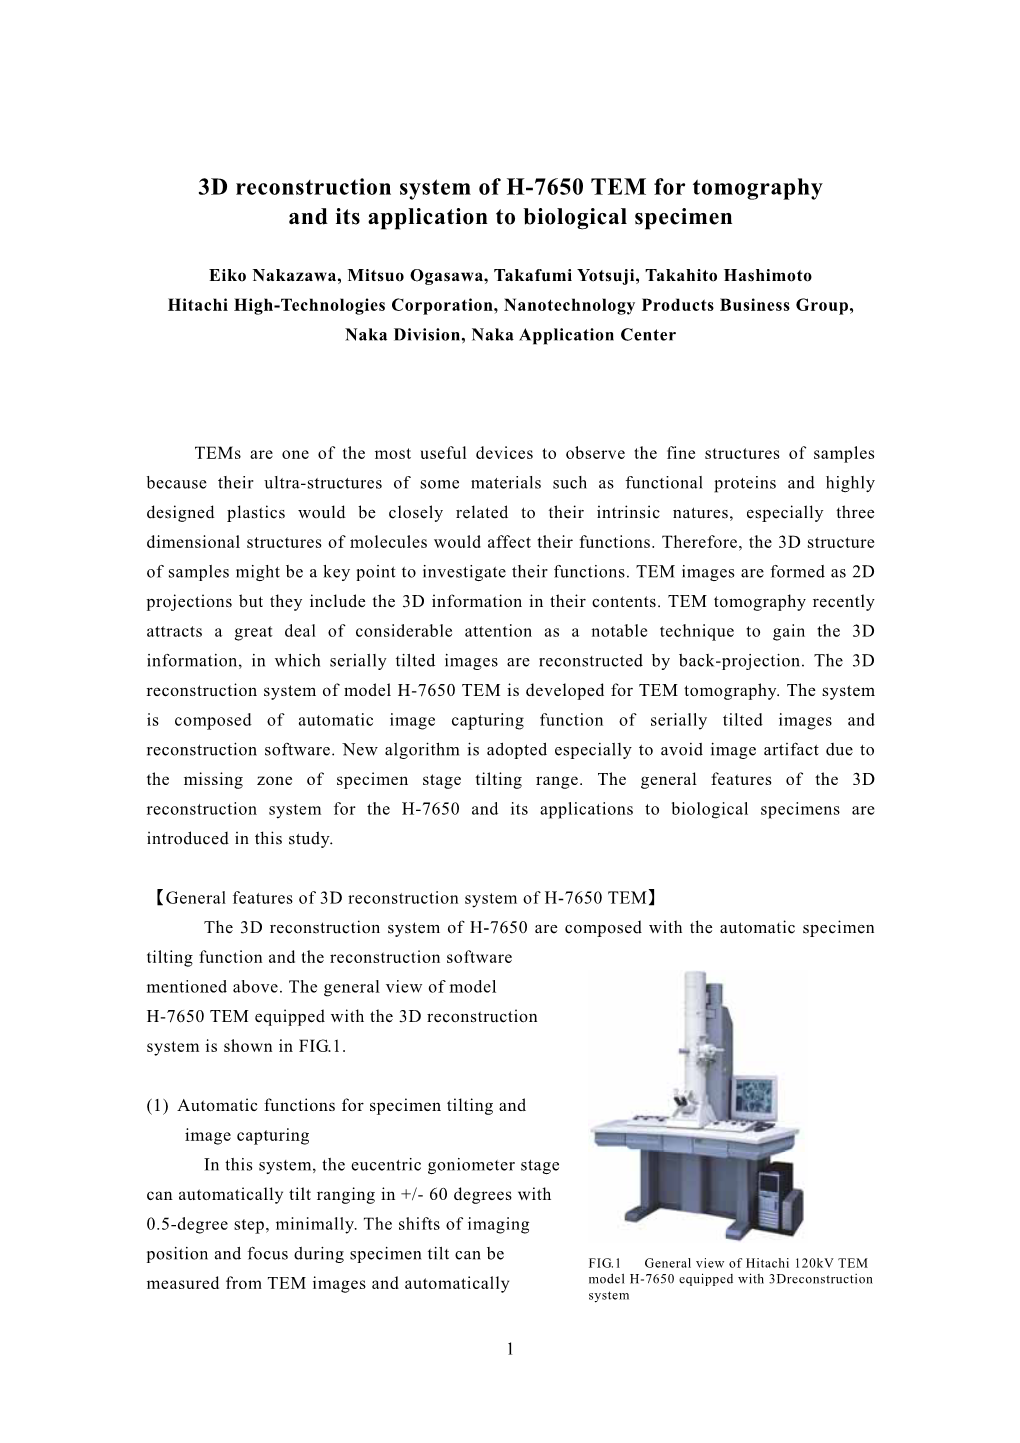 3D Reconstruction System of H-7650 TEM for Tomography and Its Application to Biological Specimen